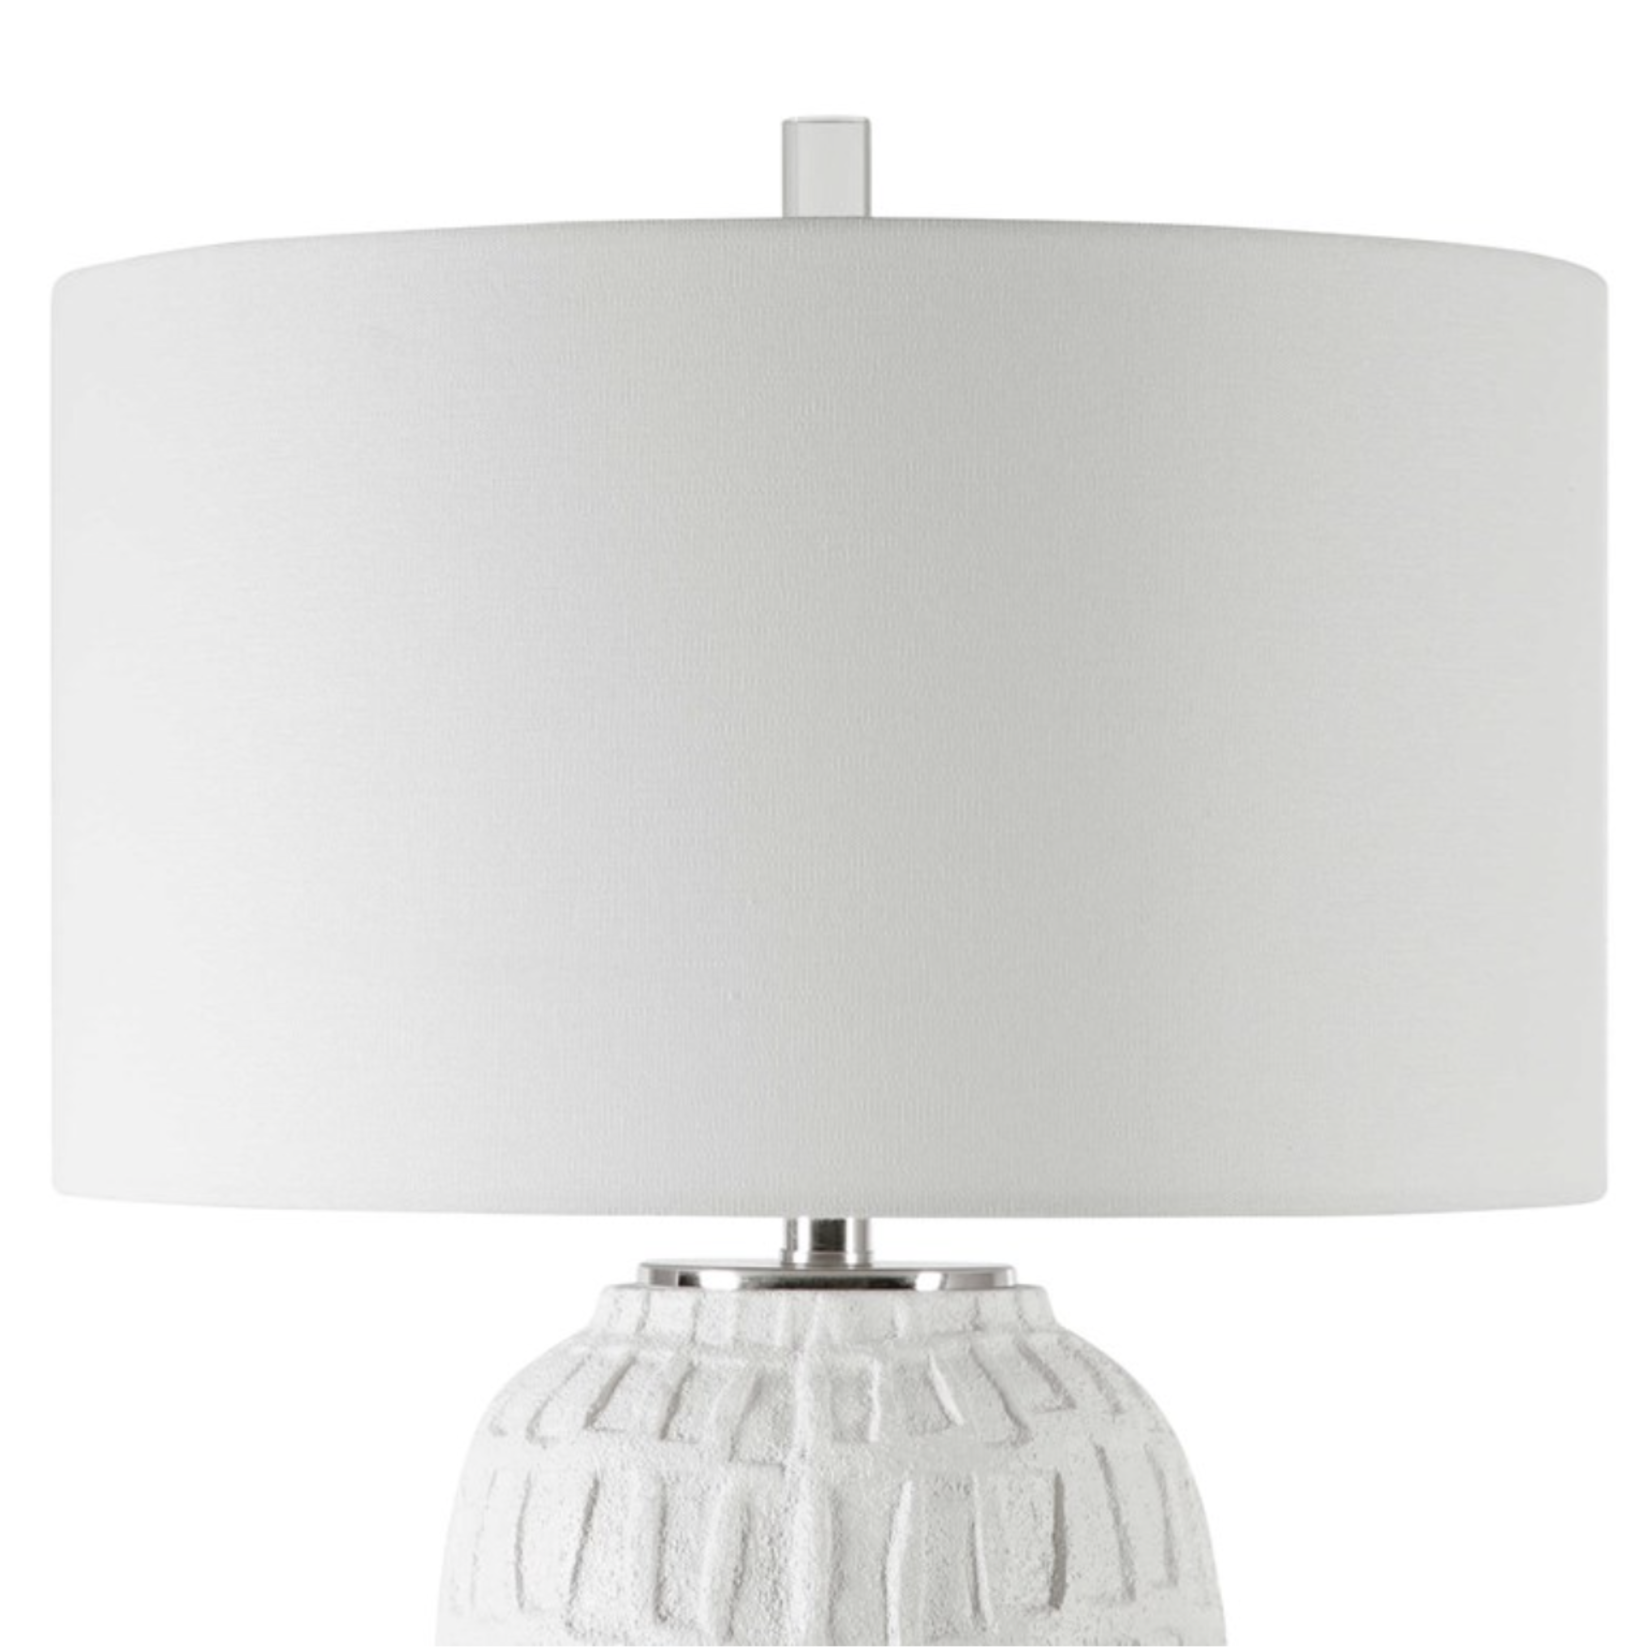 Outside The Box 27" Uttermost Caelina White Ceramic With Organic Grid Table Lamp